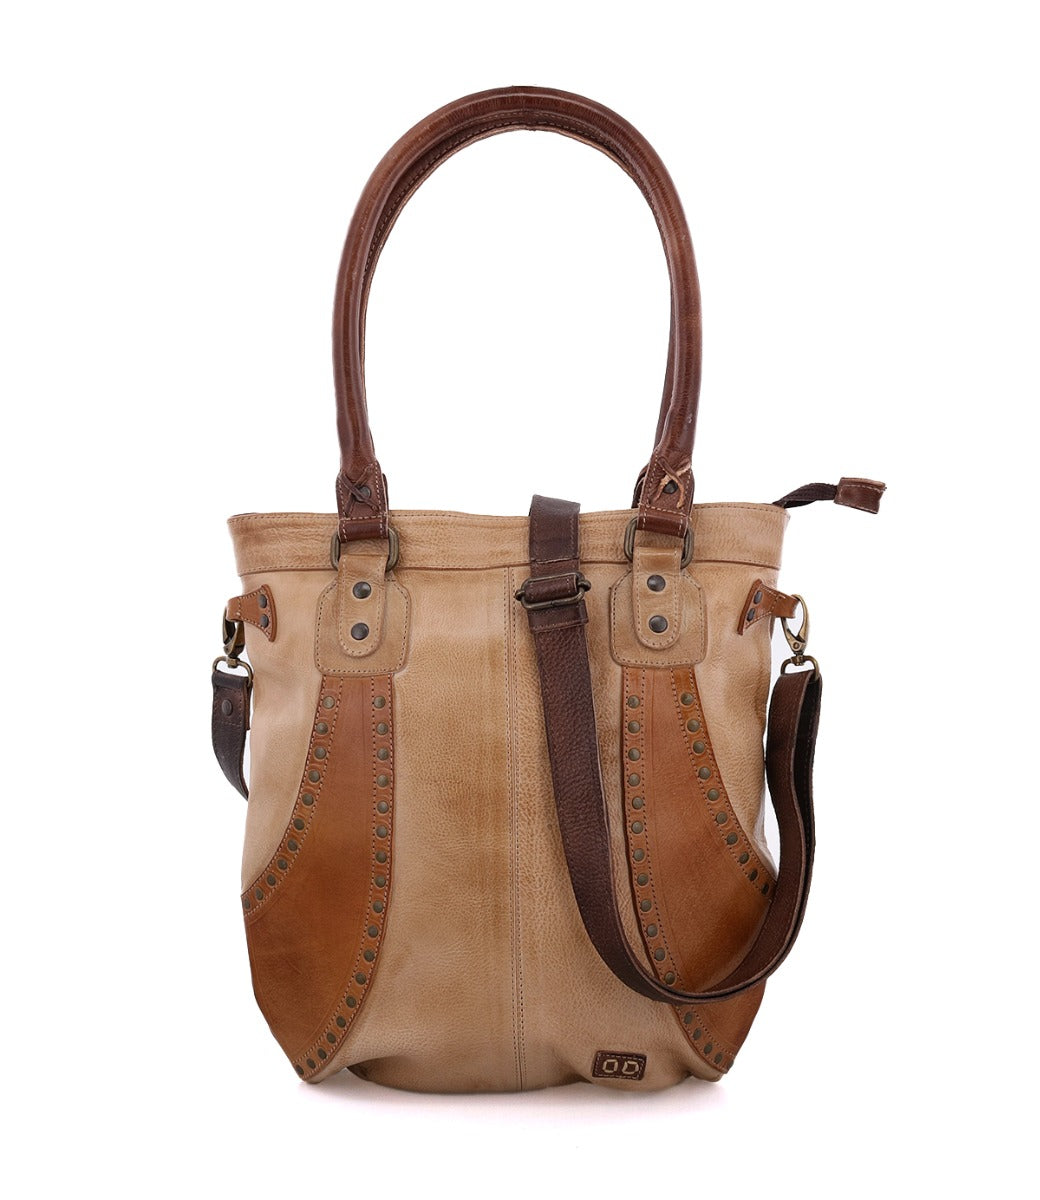 A brown and tan Bed Stu Gala handbag with straps.